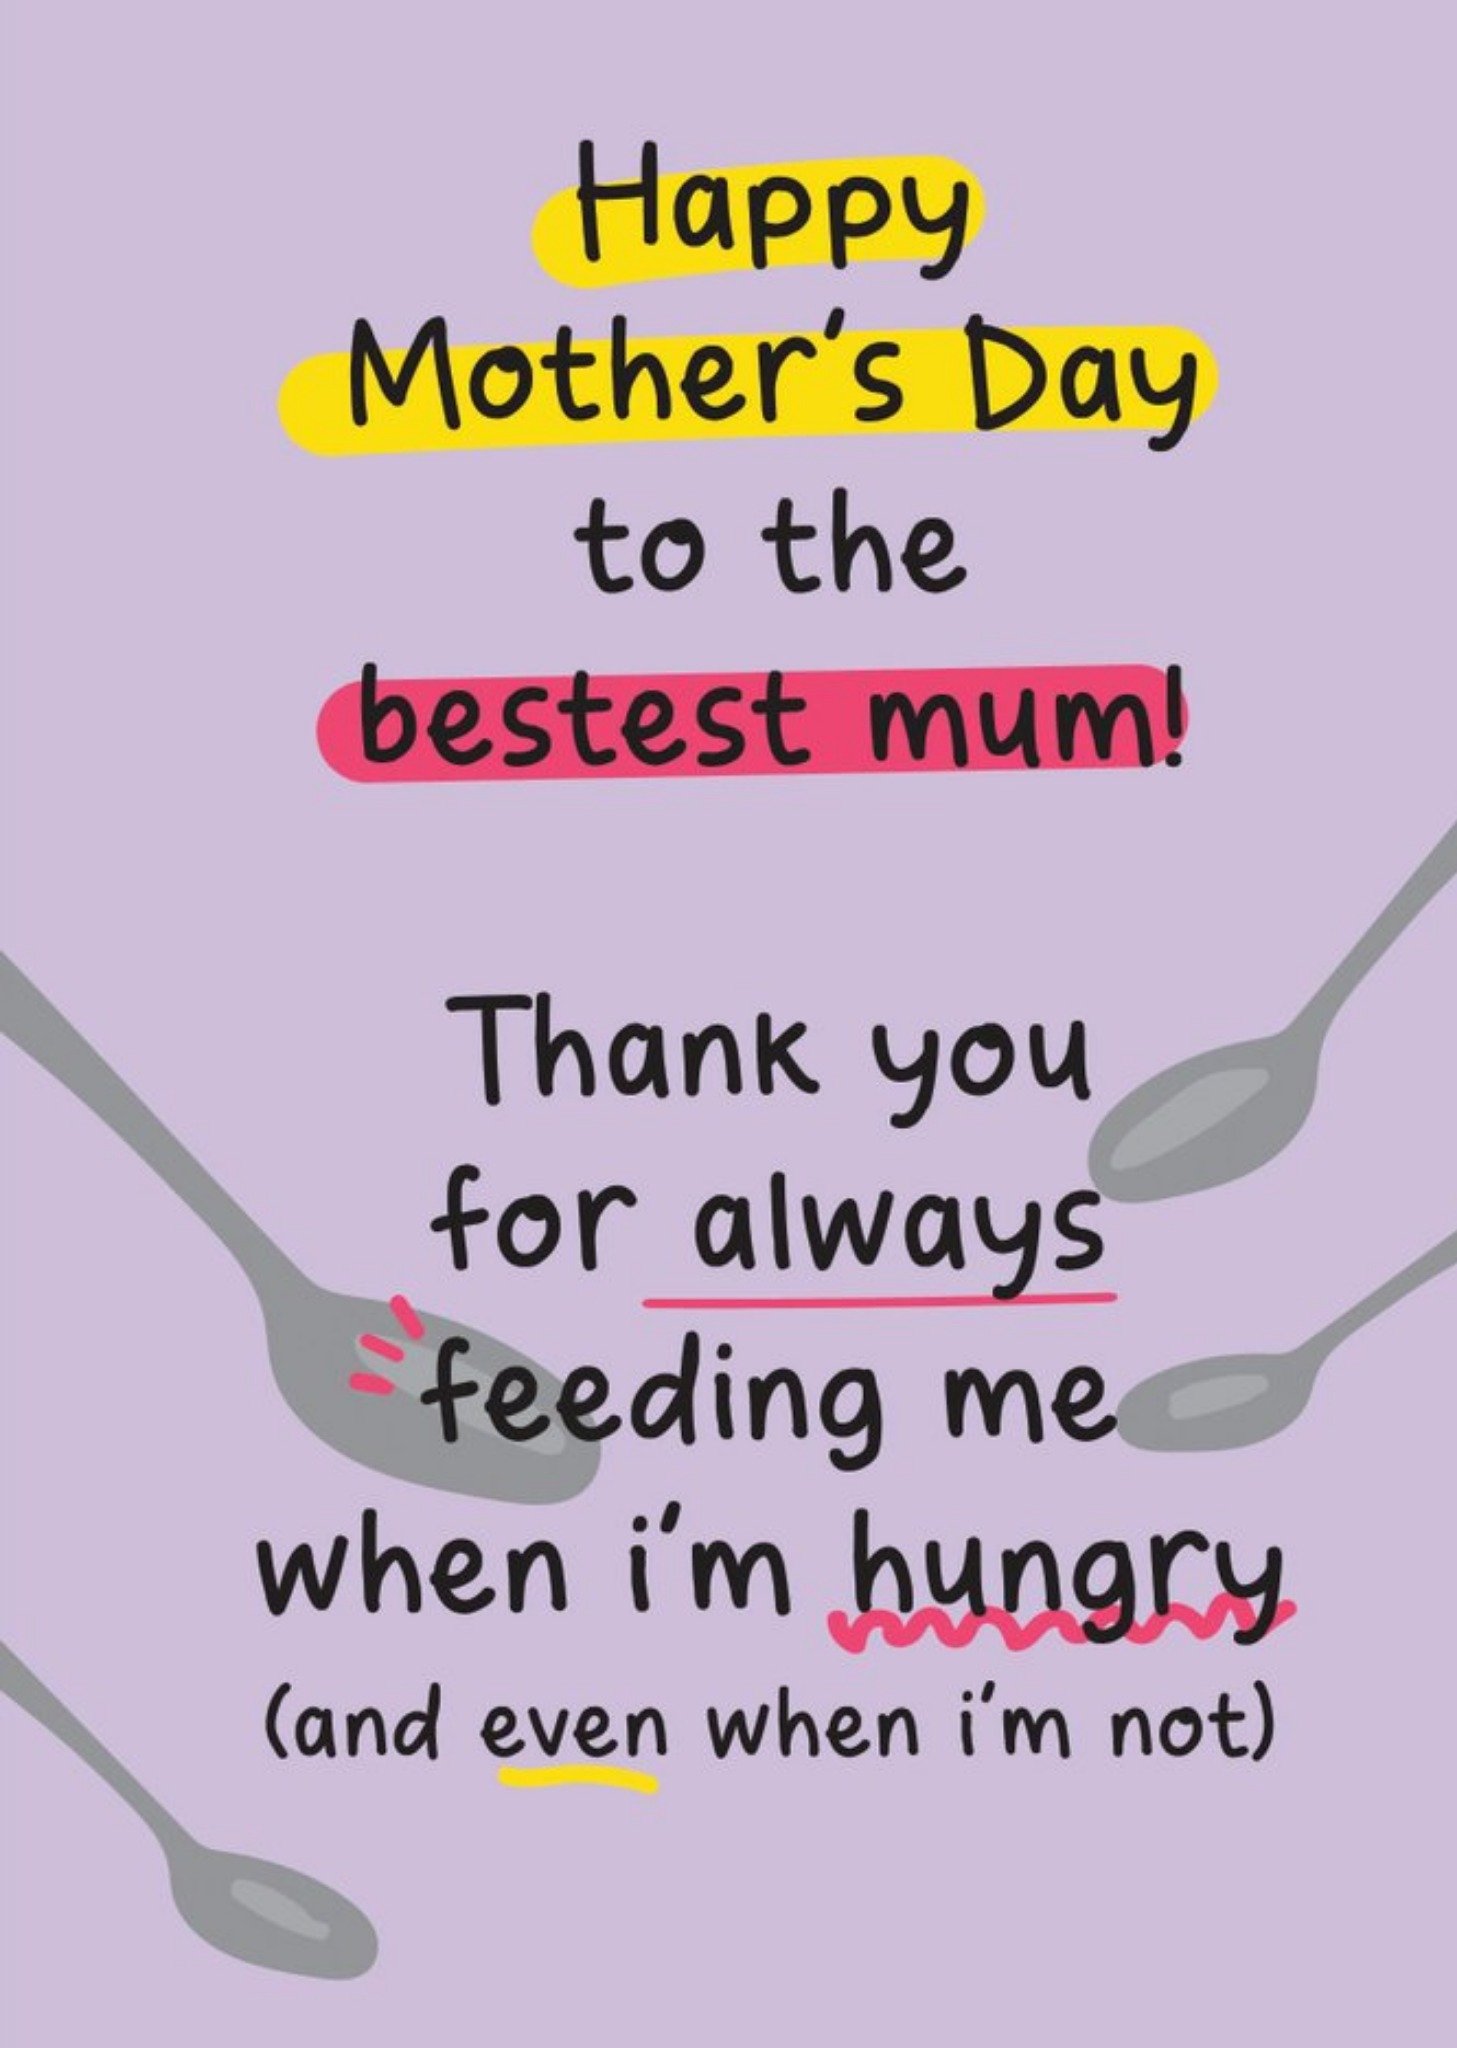 Moonpig Always Feeding Me When I'm Hungry Funny Mother's Day Card, Large